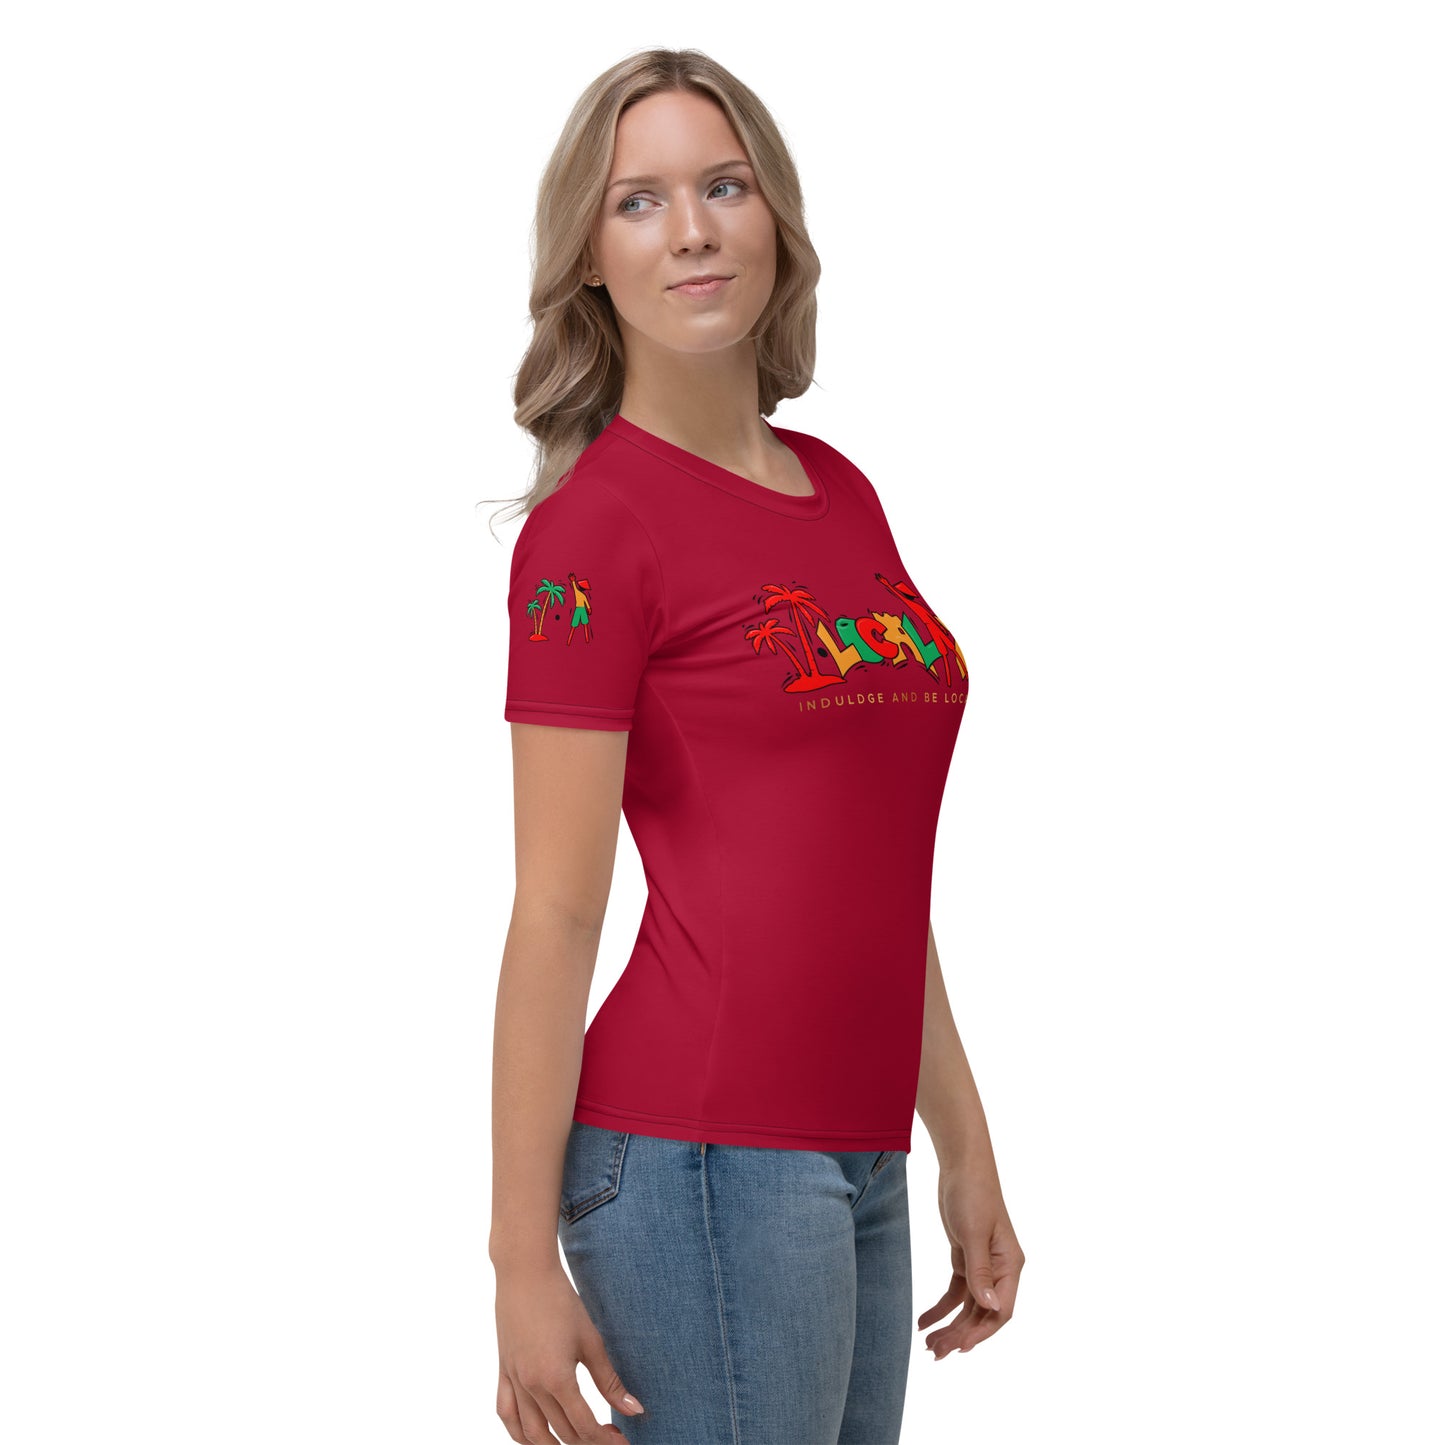 Maroon V.Localized (Ice/Gold/Green) Women’s Dry-Fit T-Shirt